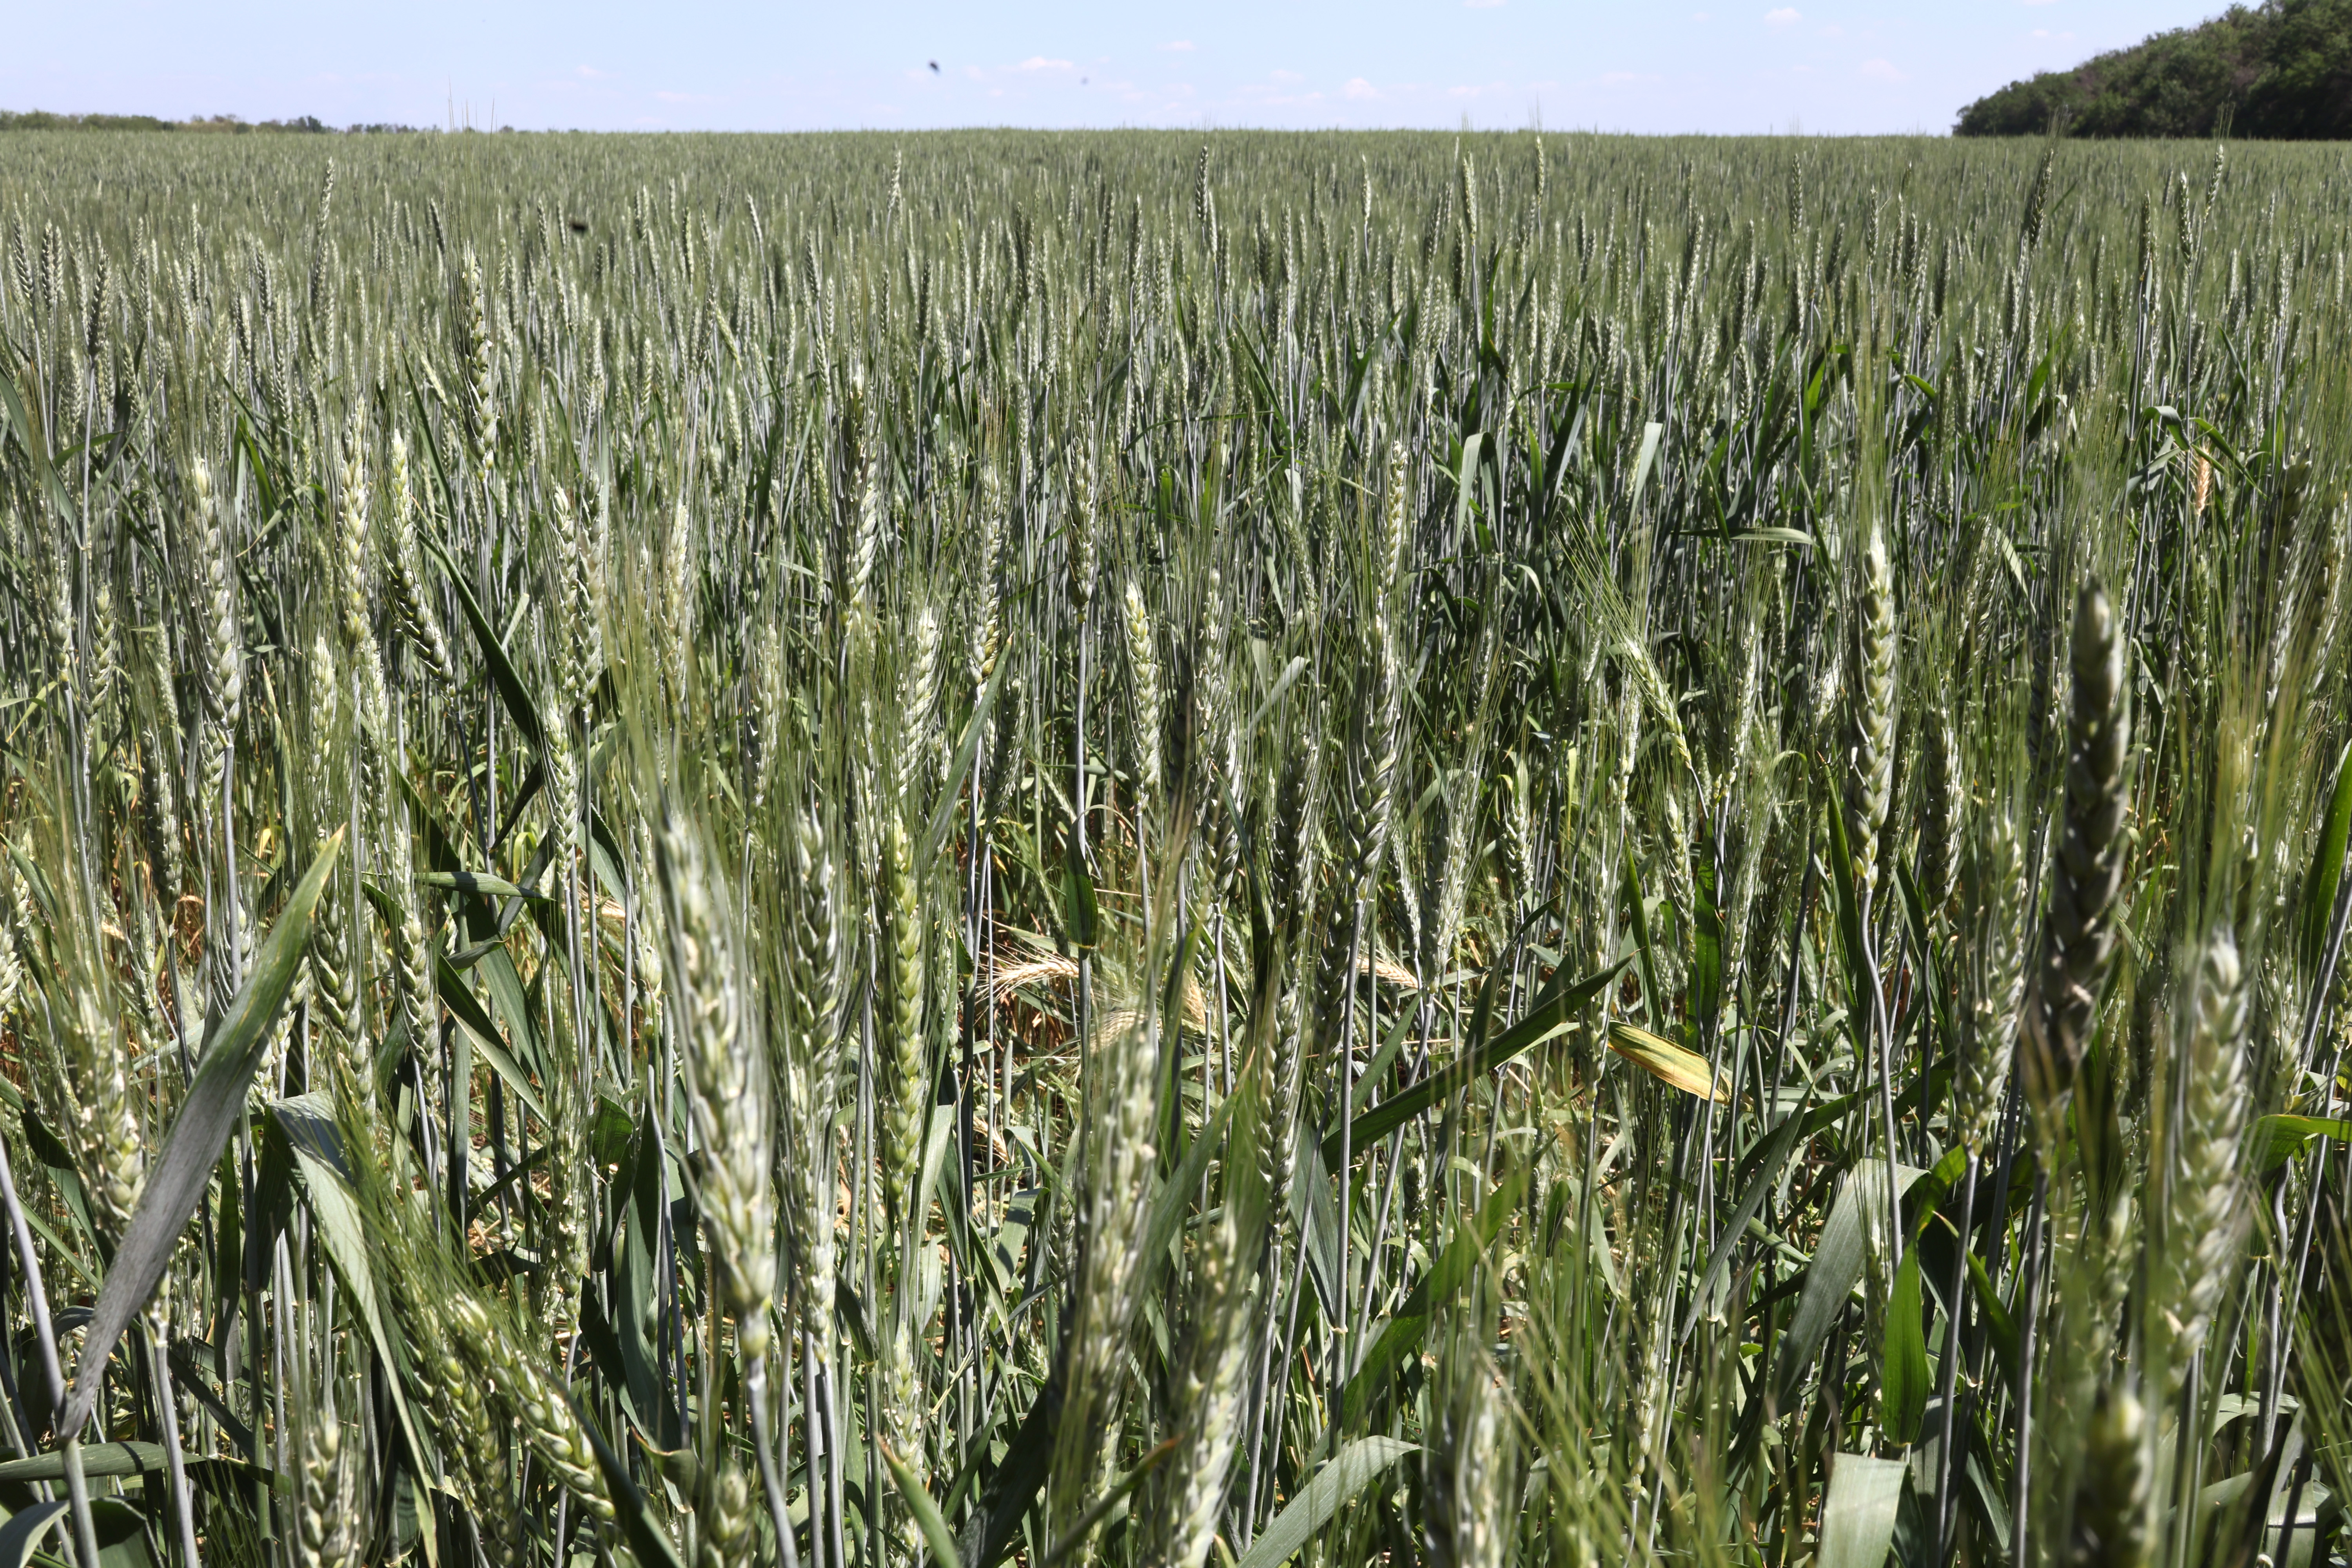 SLOVIANSK, UKRAINE - JUNE 08: Wheat grows in a farm field about 25 kilometers from the front line of battle between Russian and Ukrainian troops on June 08, 2022 near Sloviansk, Ukraine. In recent weeks, Russia has concentrated its firepower on Ukraine's Donbas region, where it has long backed two separatist regions at war with the Ukrainian government since 2014. (Photo by Scott Olson/Getty Images)